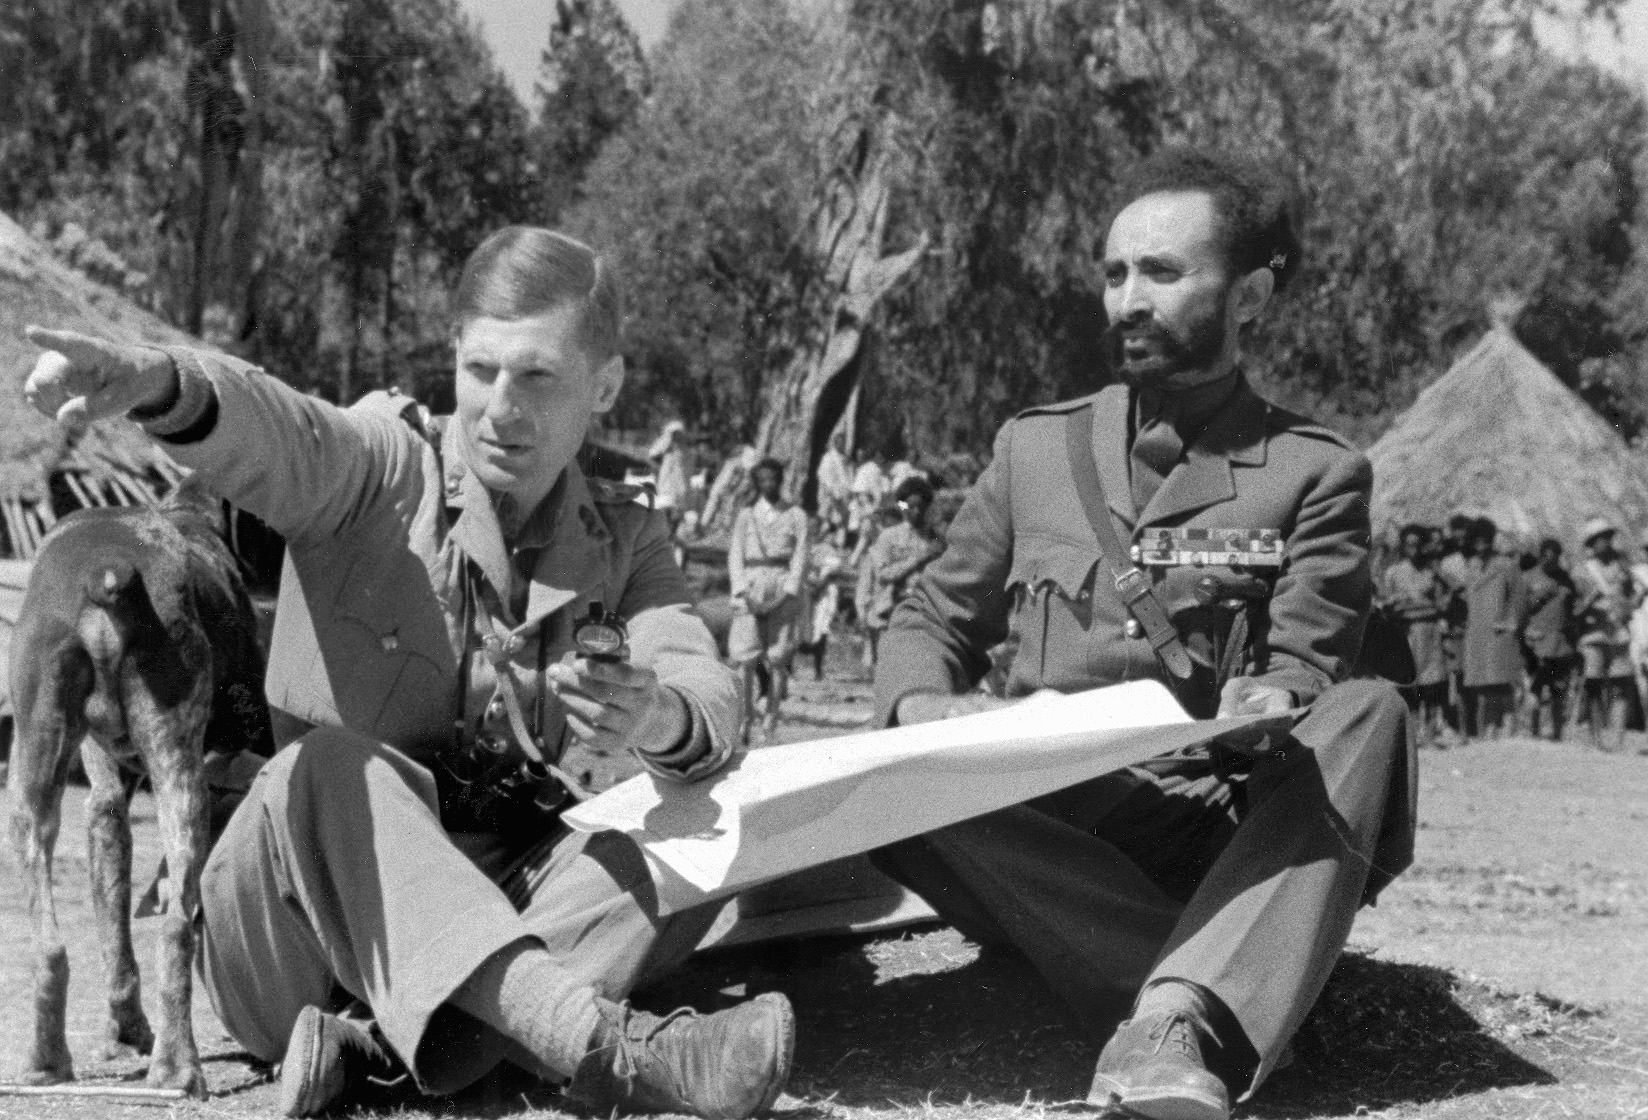 Wingate gestures to Ethiopian Emperor Haile Selassie during the Abyssinian Campaign in 1941.